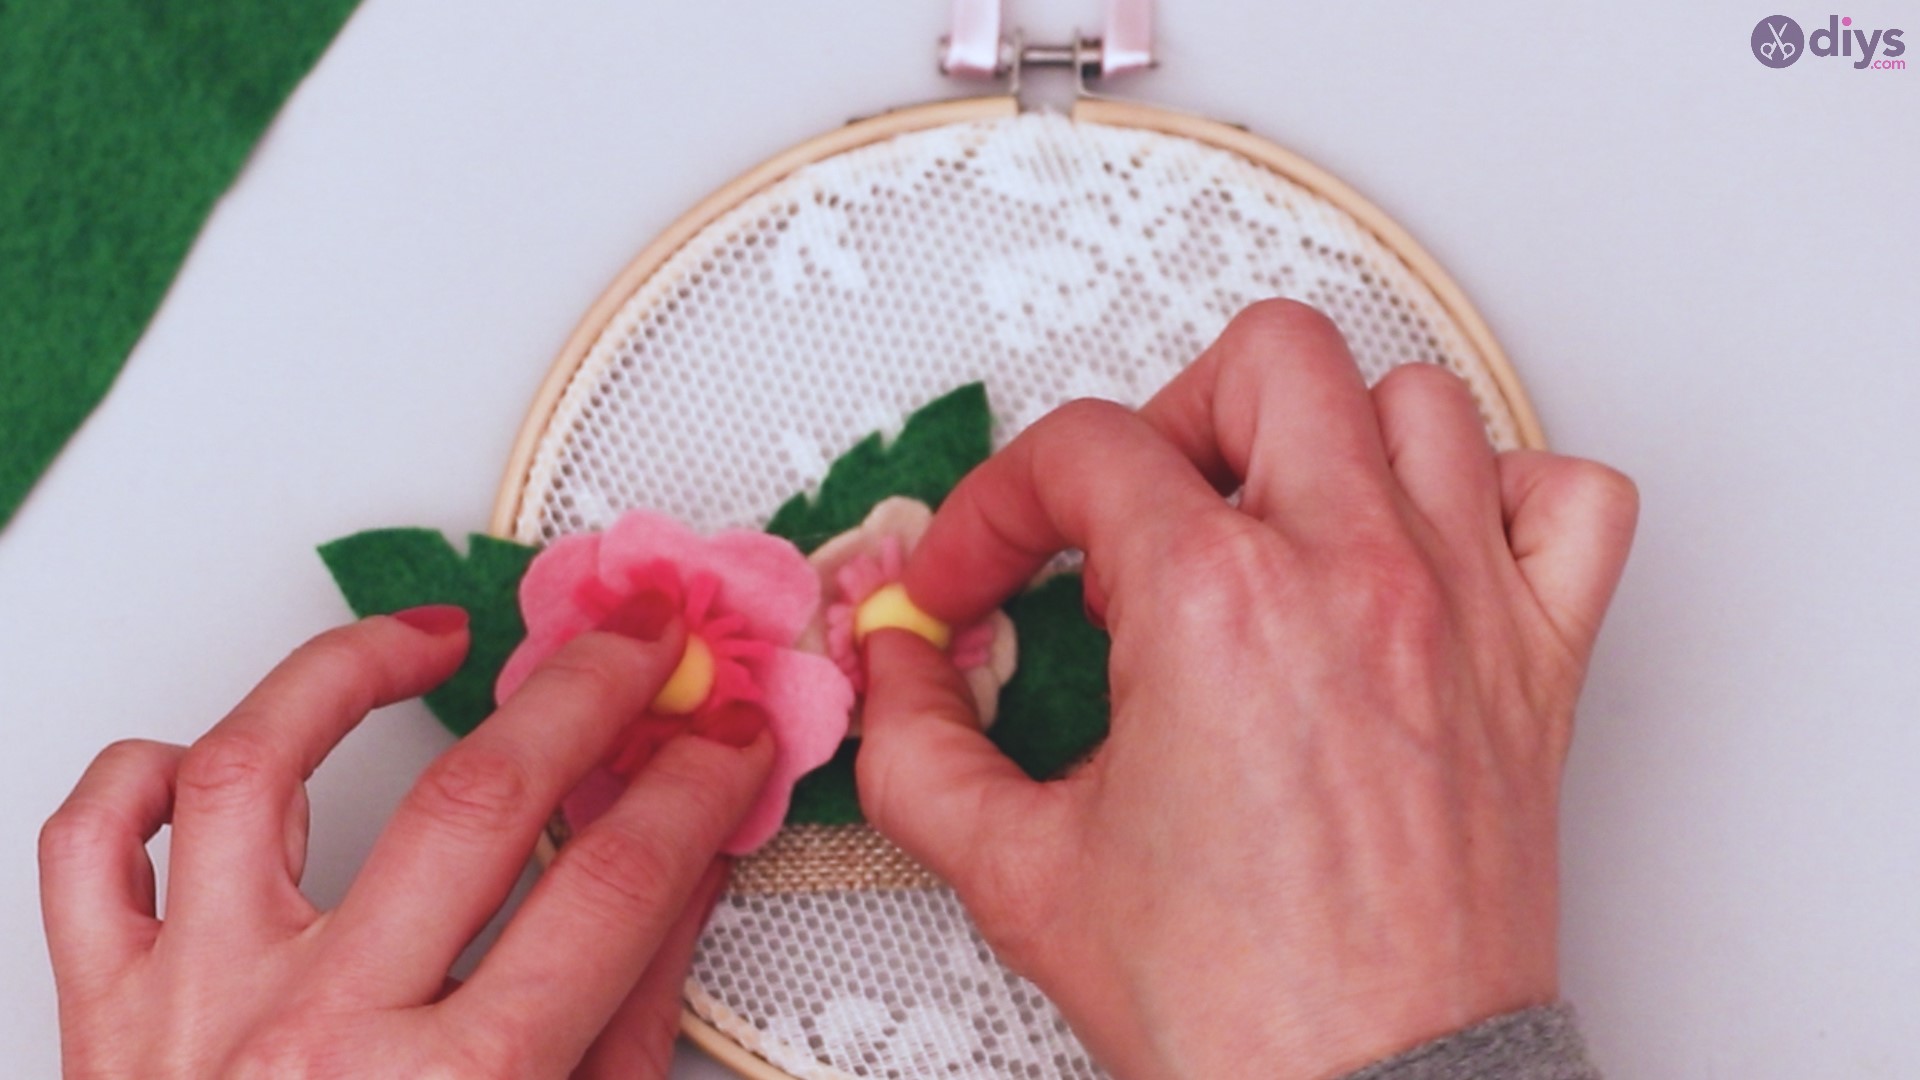 Diy embroidery hoop wall decor tutorial step by step (63)